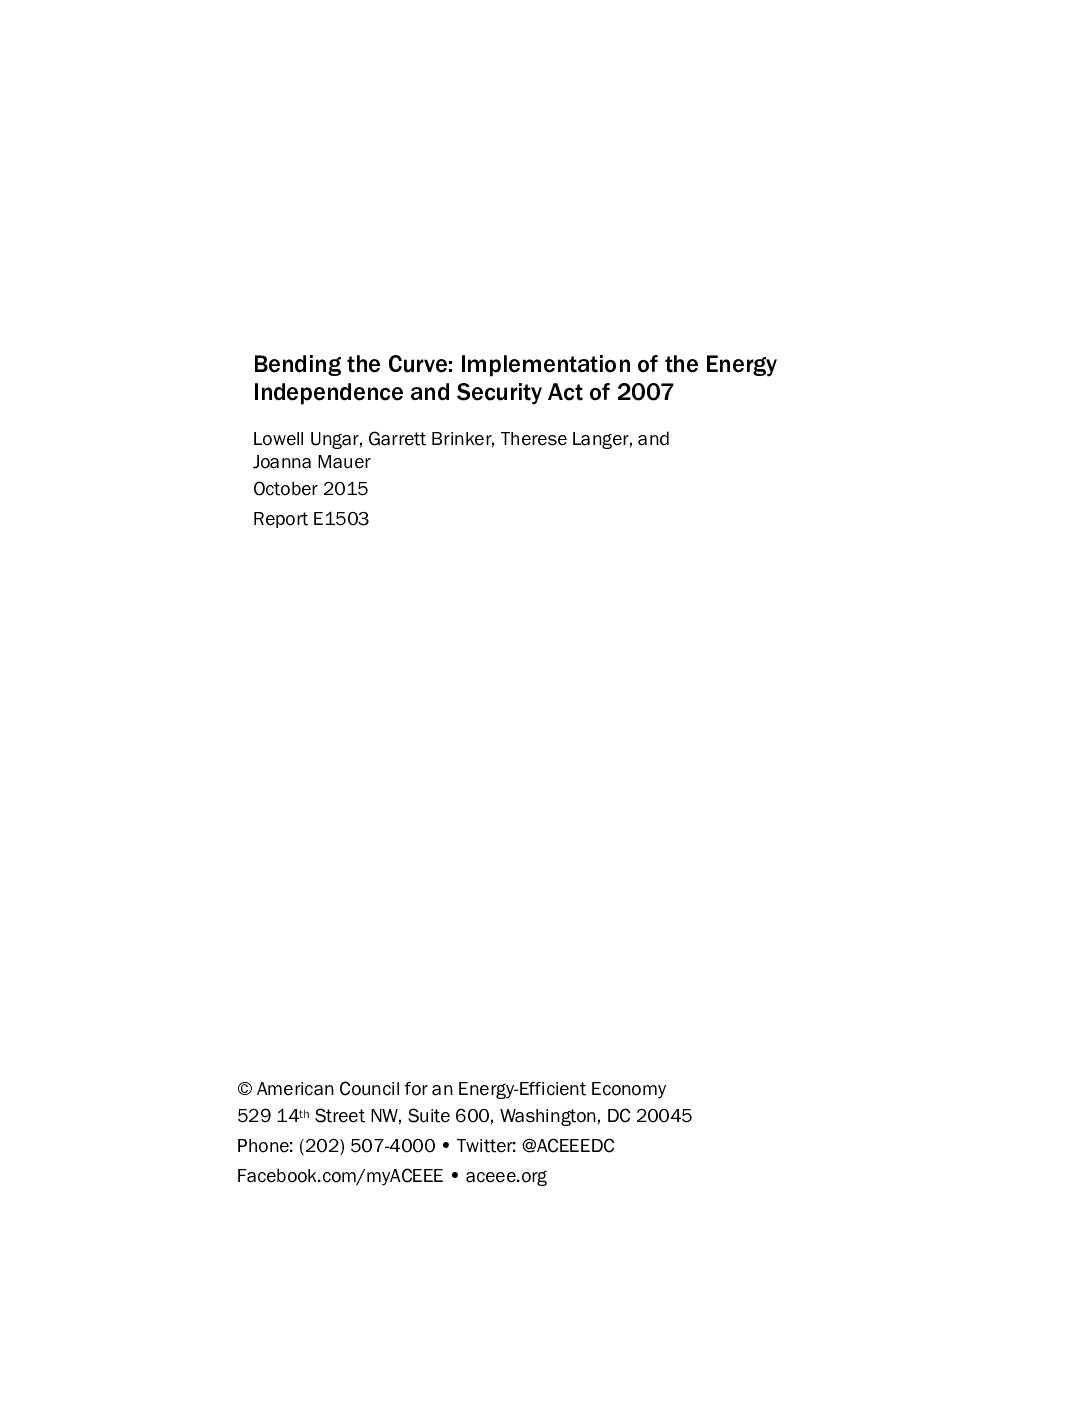 Bending the Curve: Implementation of the Energy Independence and Security Act of 2007